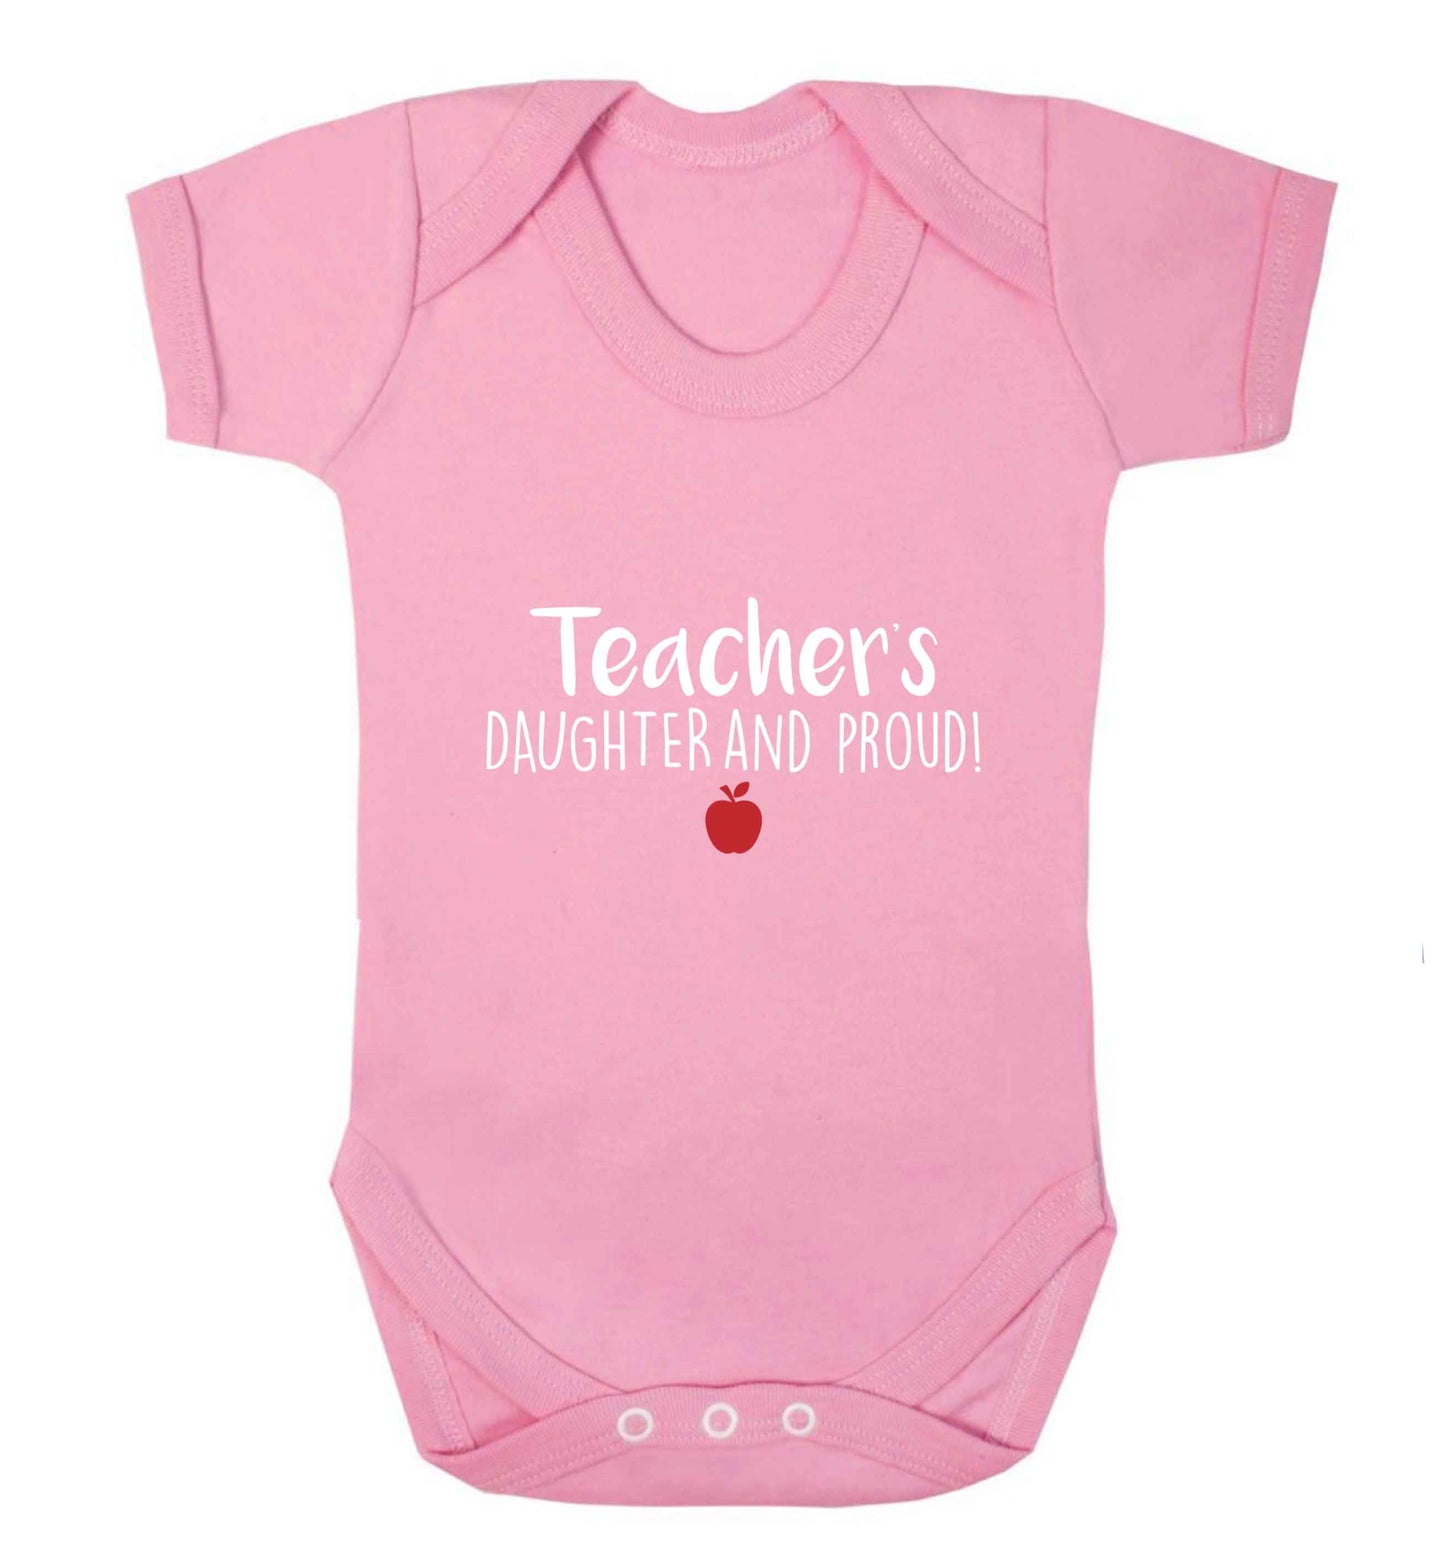 Teachers daughter and proud baby vest pale pink 18-24 months